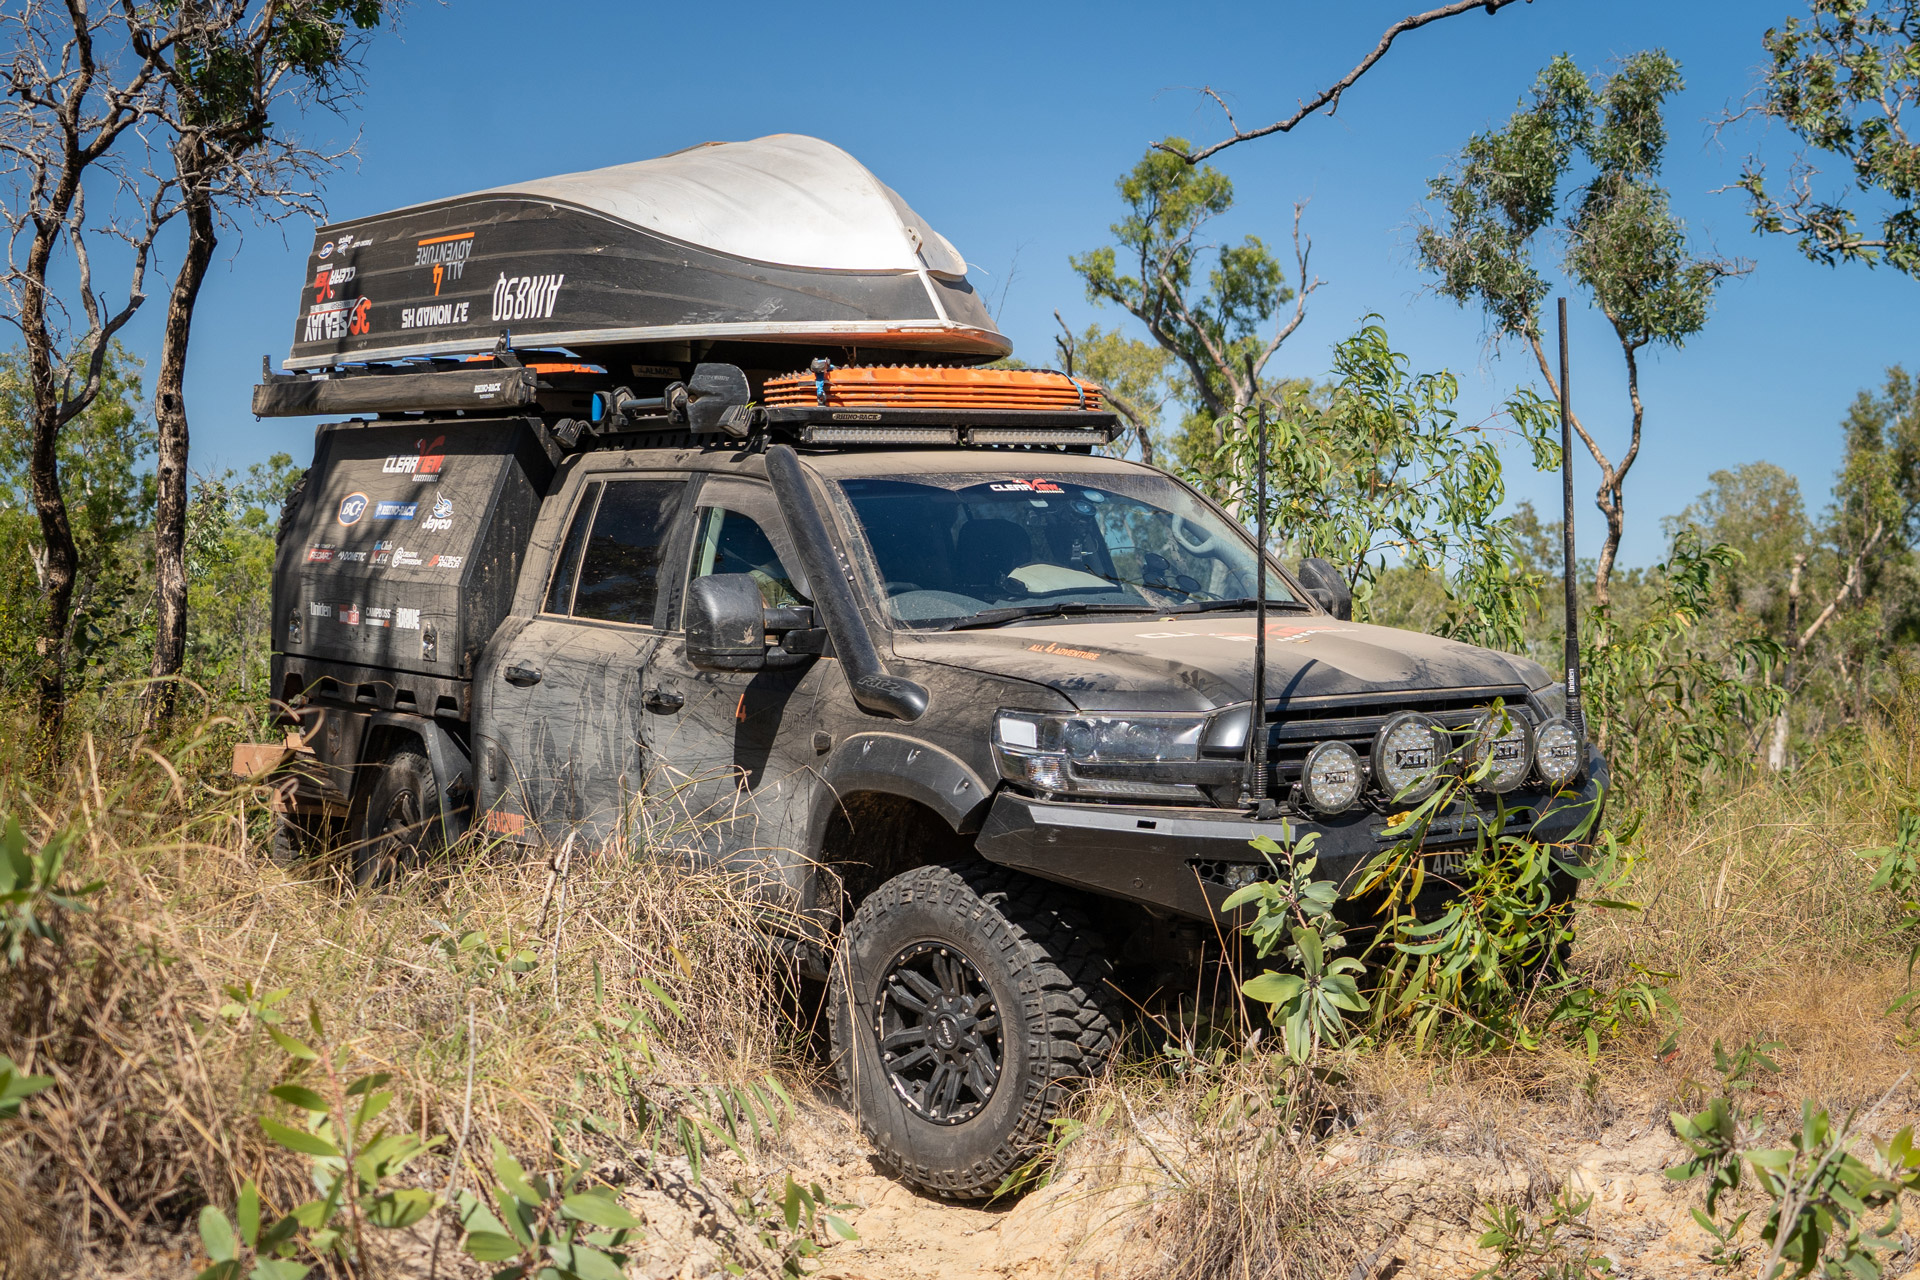 All 4 Adventure 200 Series LandCruiser offroad in scrub with Vapour wheels